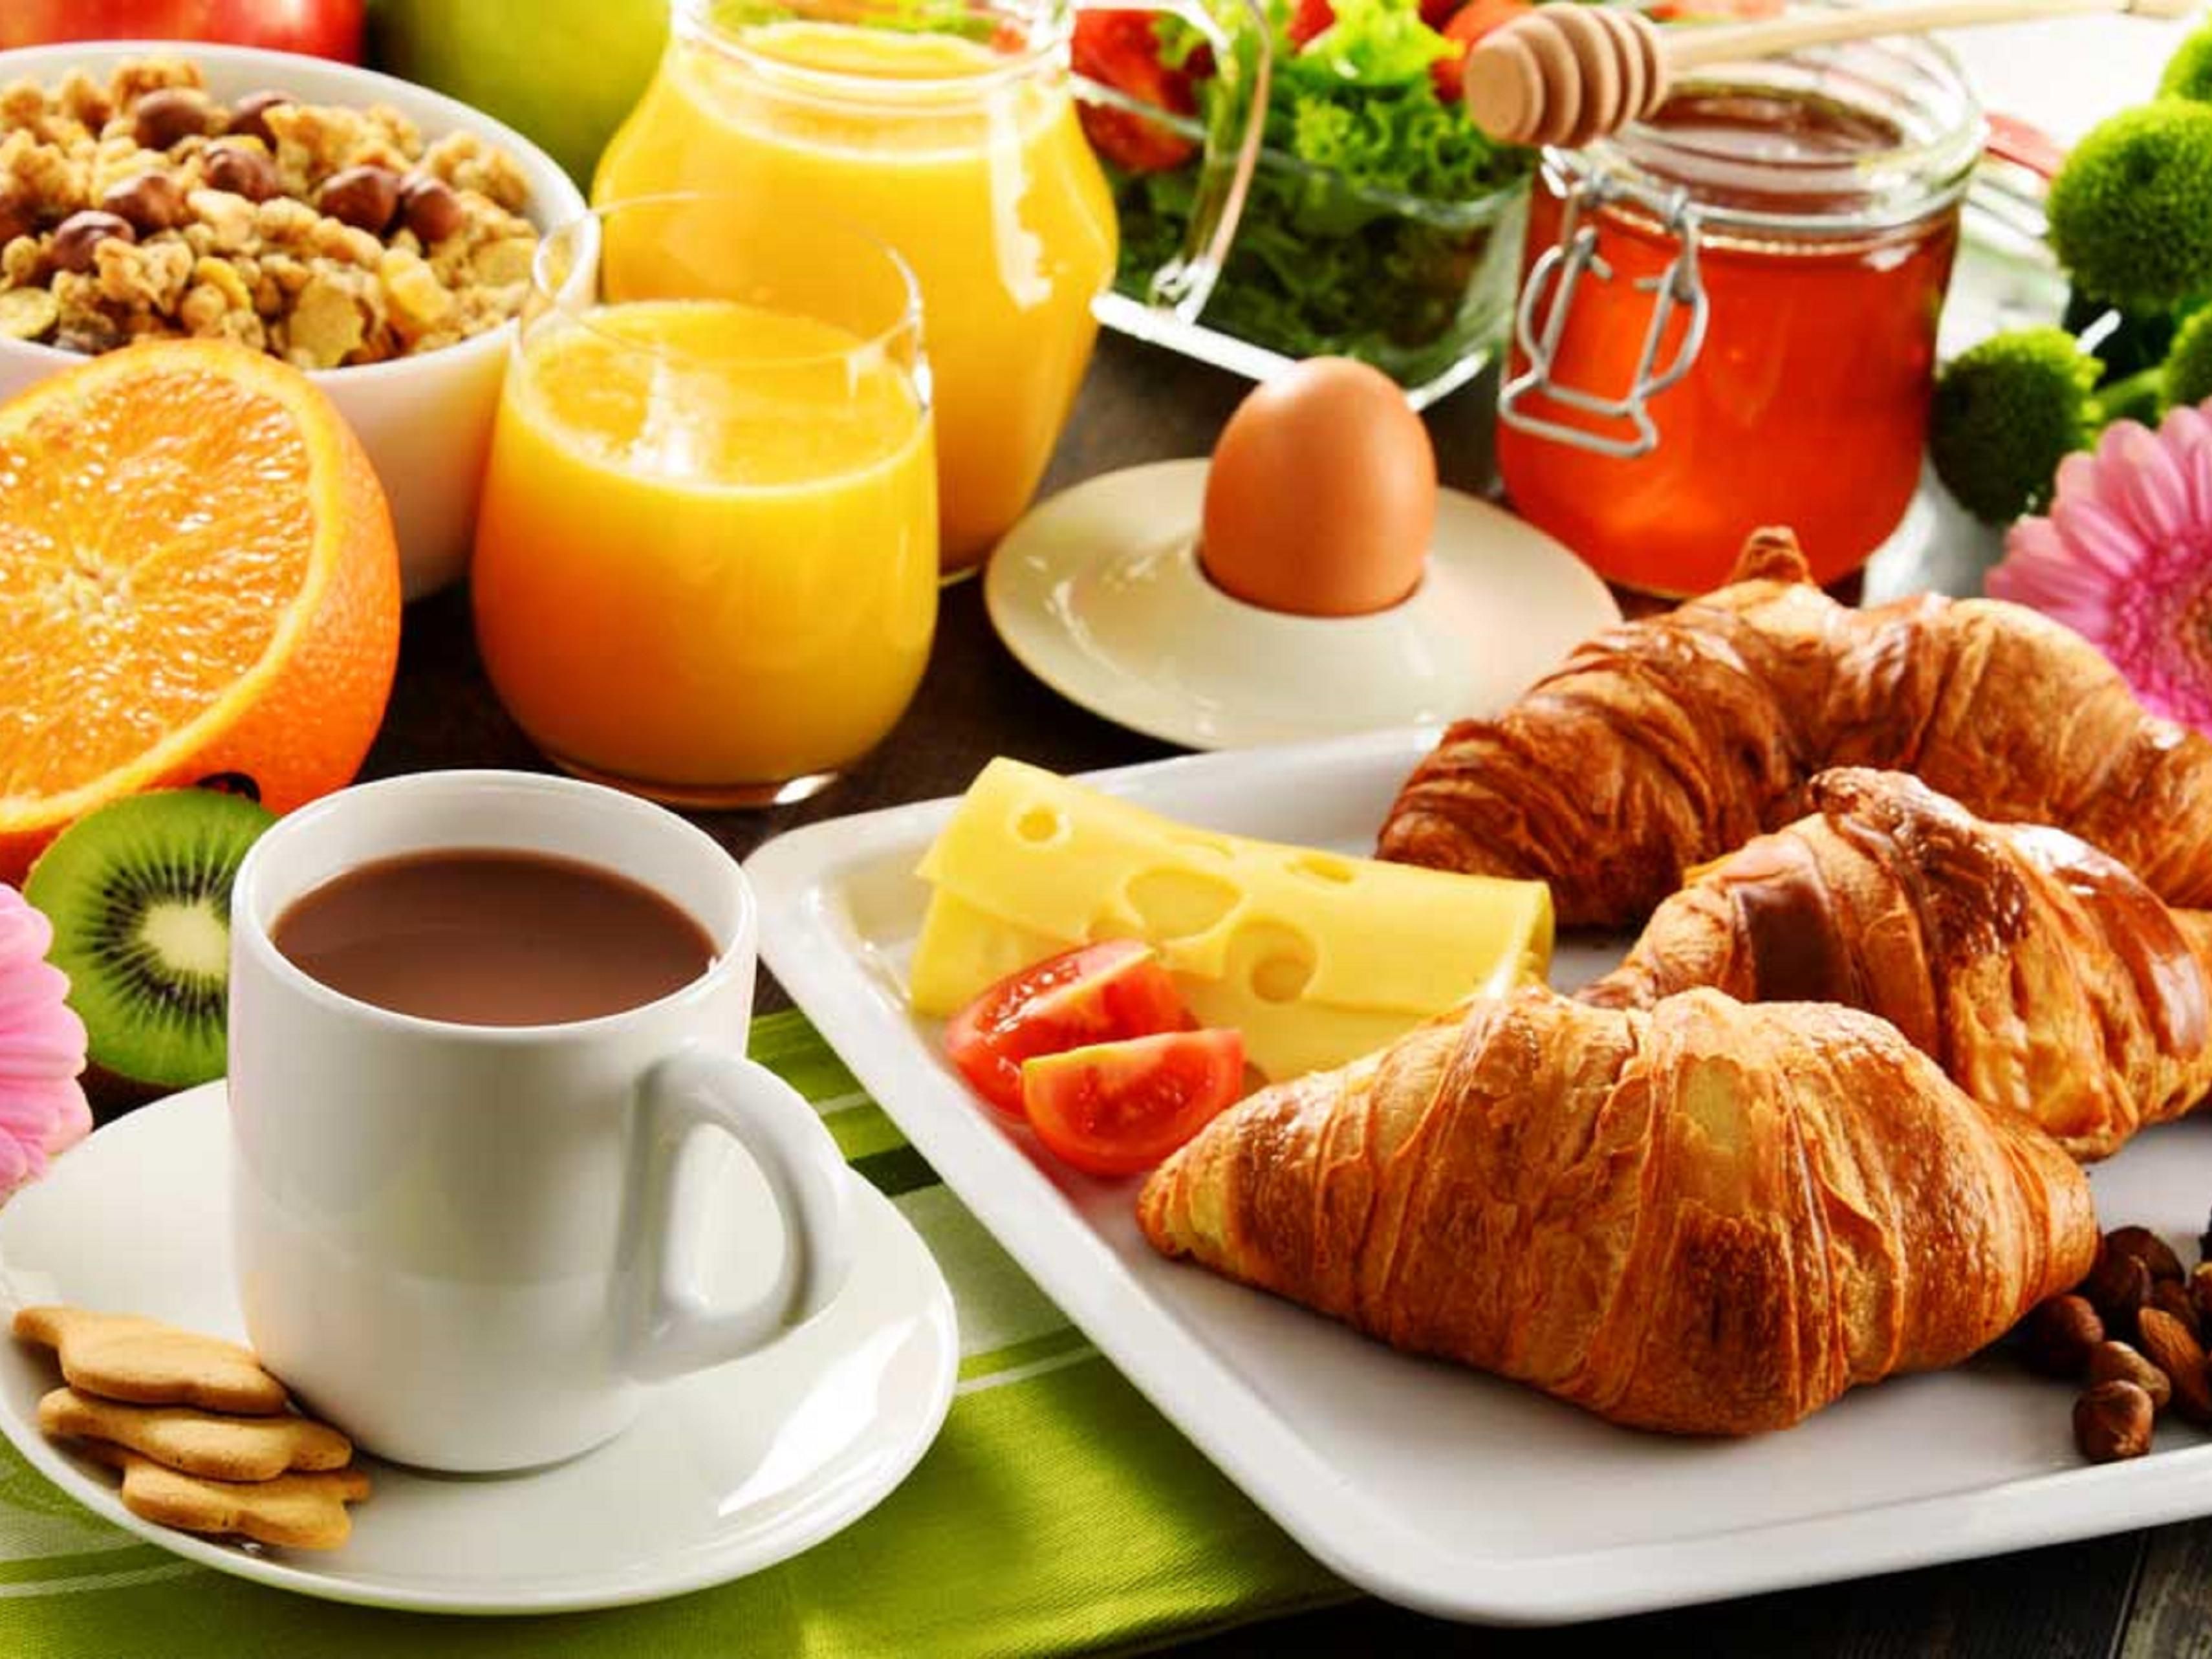 Fuel up before you head out for the day and join us for breakfast. Our full breakfast buffet is available daily for $18 for adults, $12 for kids aged 3-12, and our little friends aged two and under eat for free. Breakfast packages are also available. 